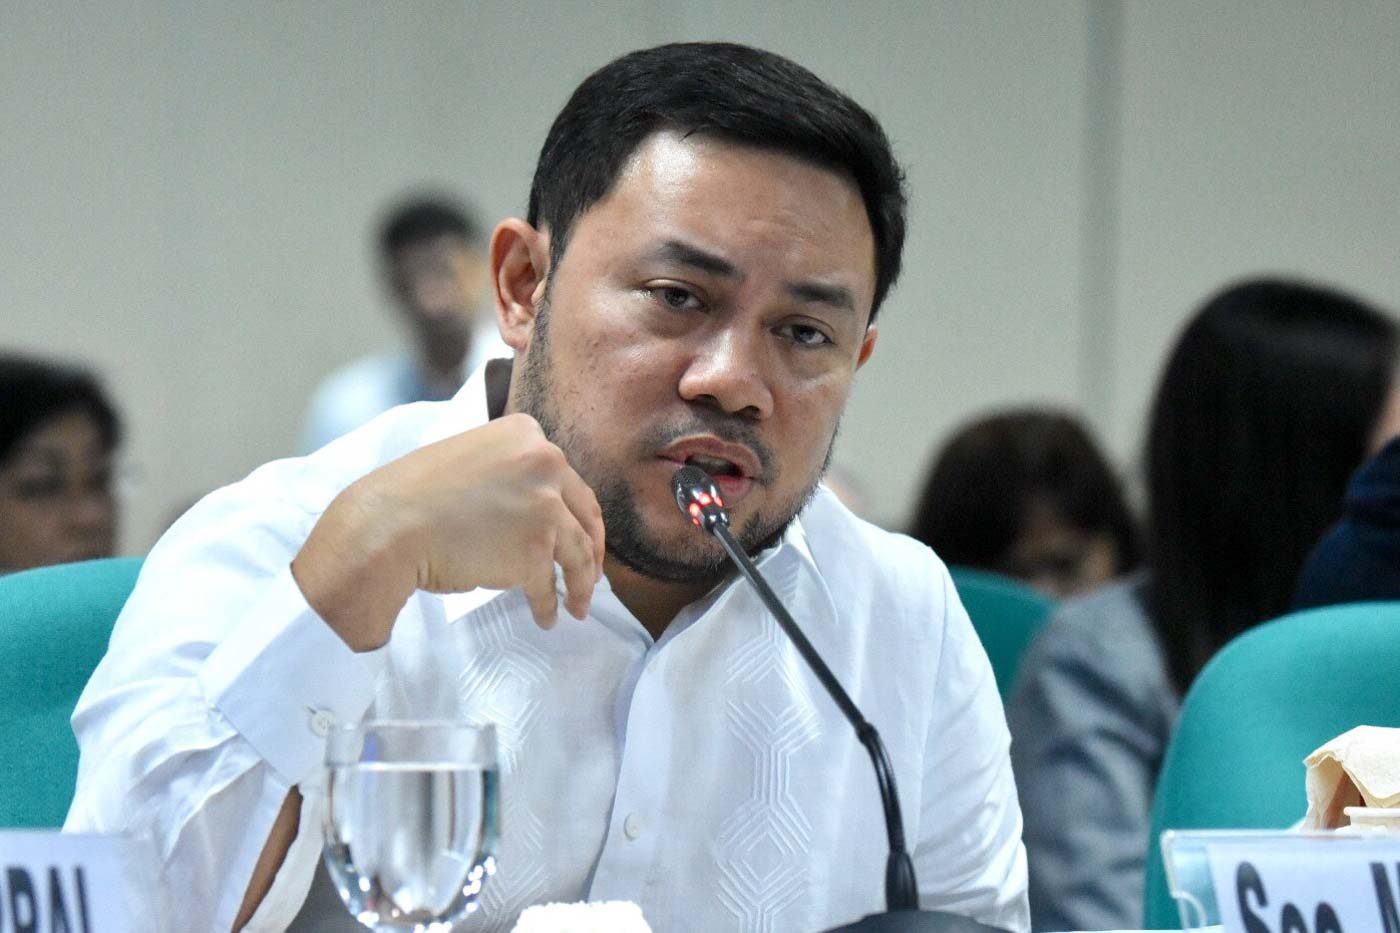 PUBLIC WORKS. DPWH Secretary Mark Villar defends the P543-billion proposed 2020 budget of his office on September 23, 2019. Photo by Angie de Silva/Rappler 